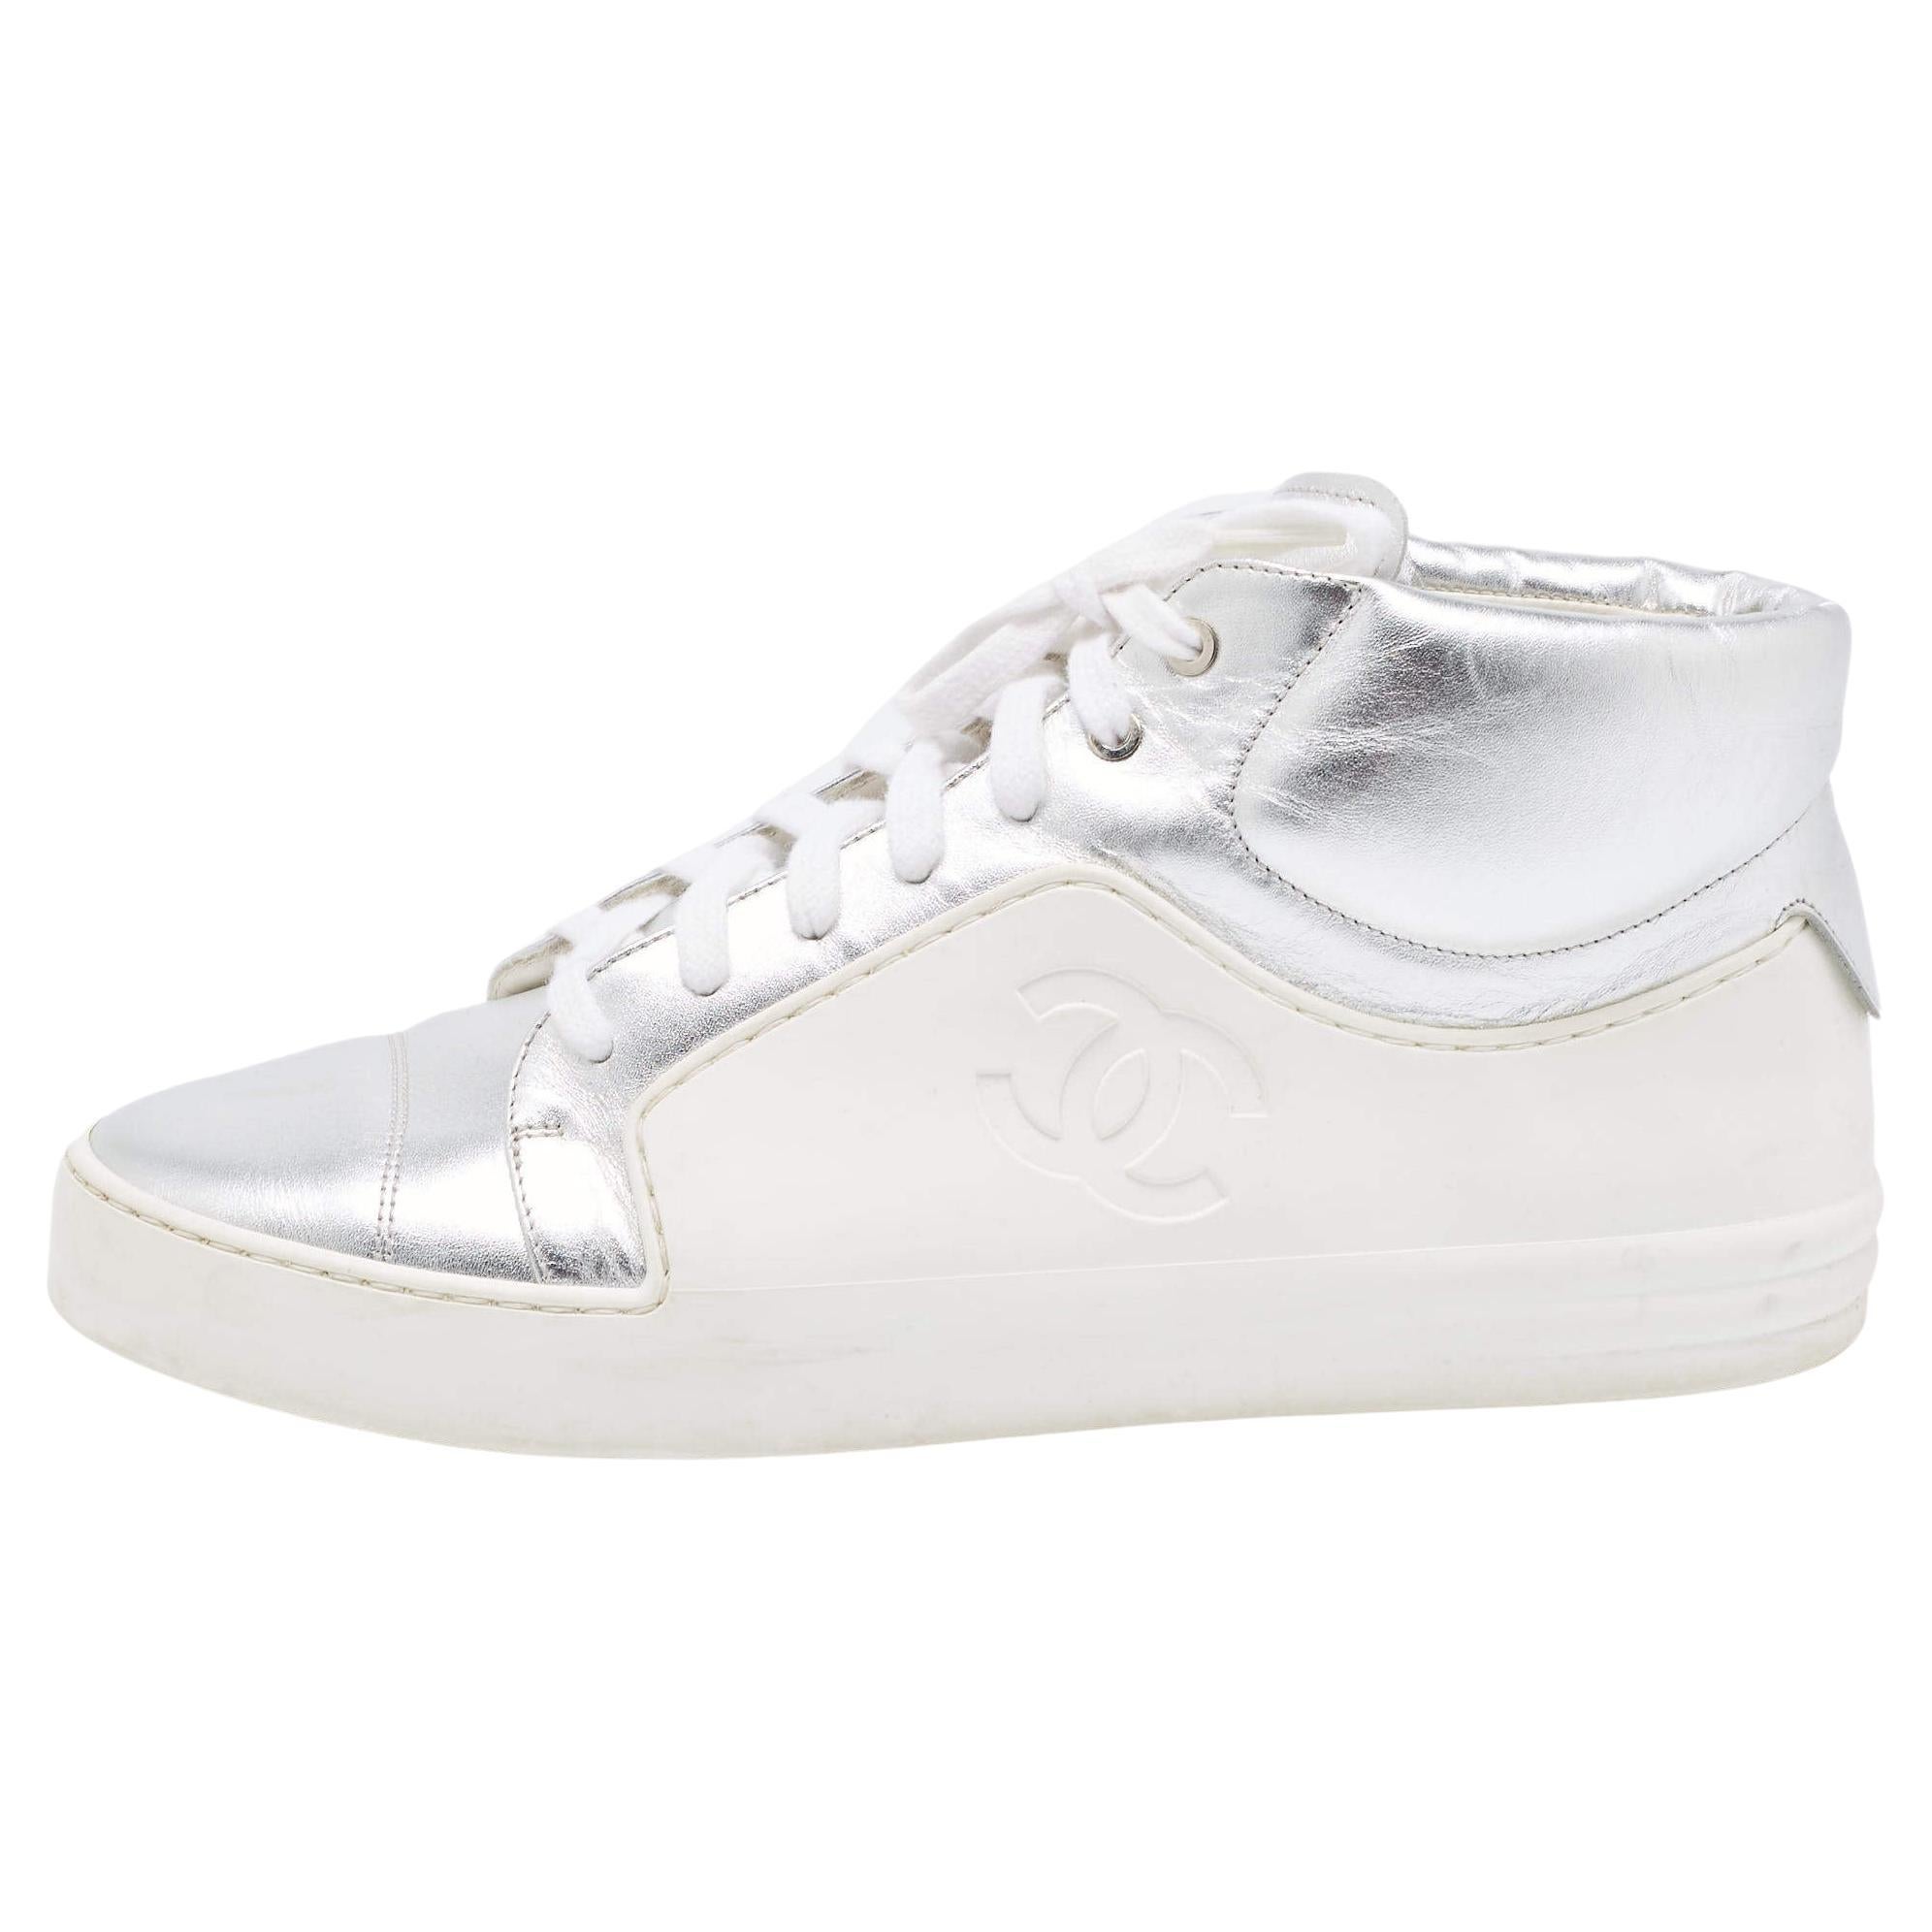 Chanel Metallic Silver/White Leather And Rubber Lace Up High Top Sneakers Size 3 For Sale